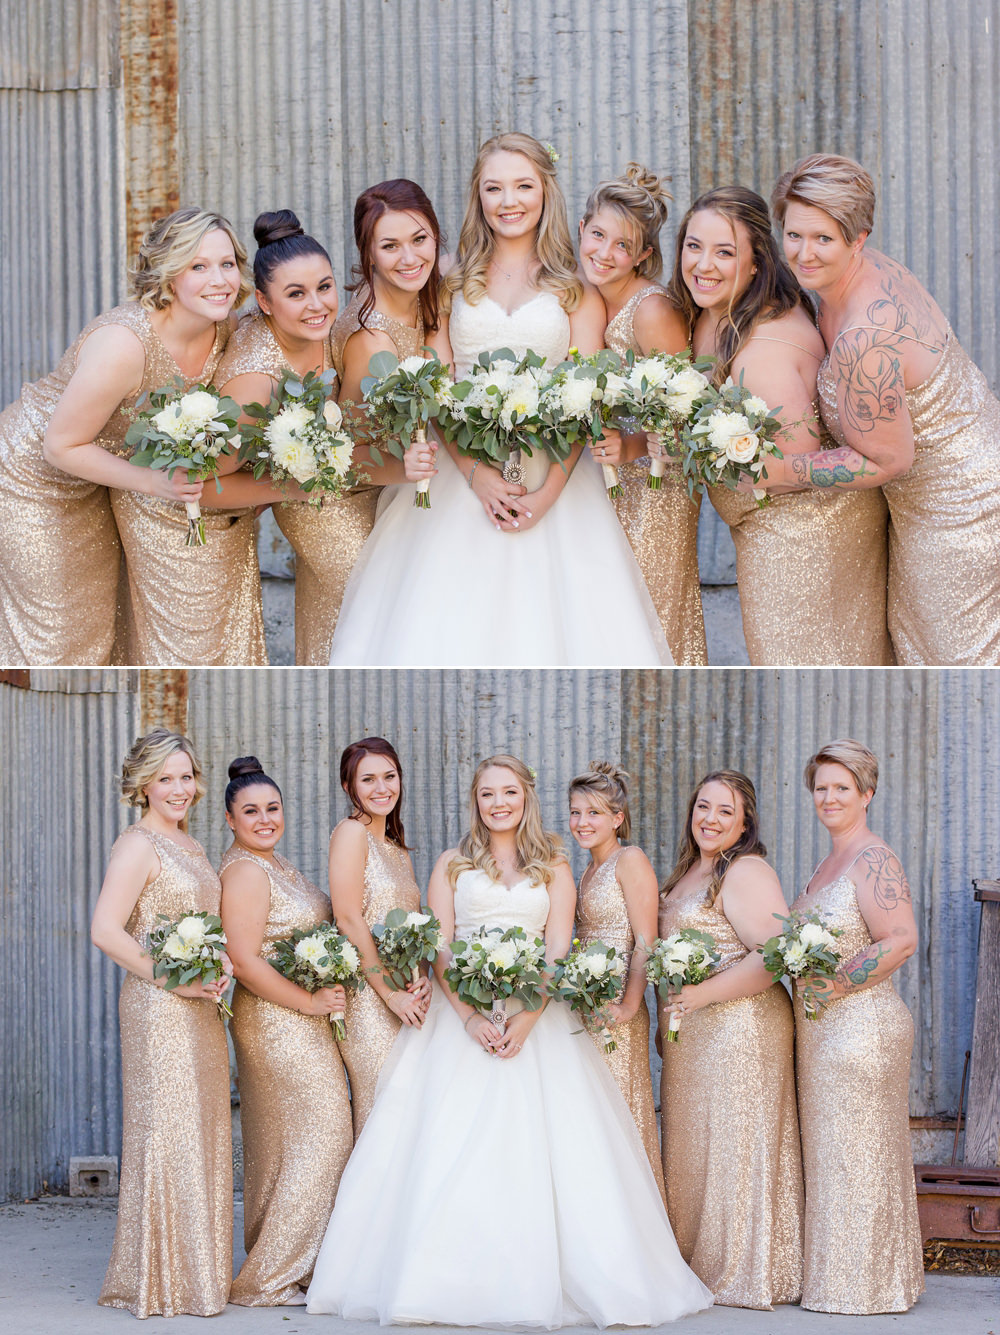 gold sequin bridesmaids dresses by Adrienne & Dani Photography